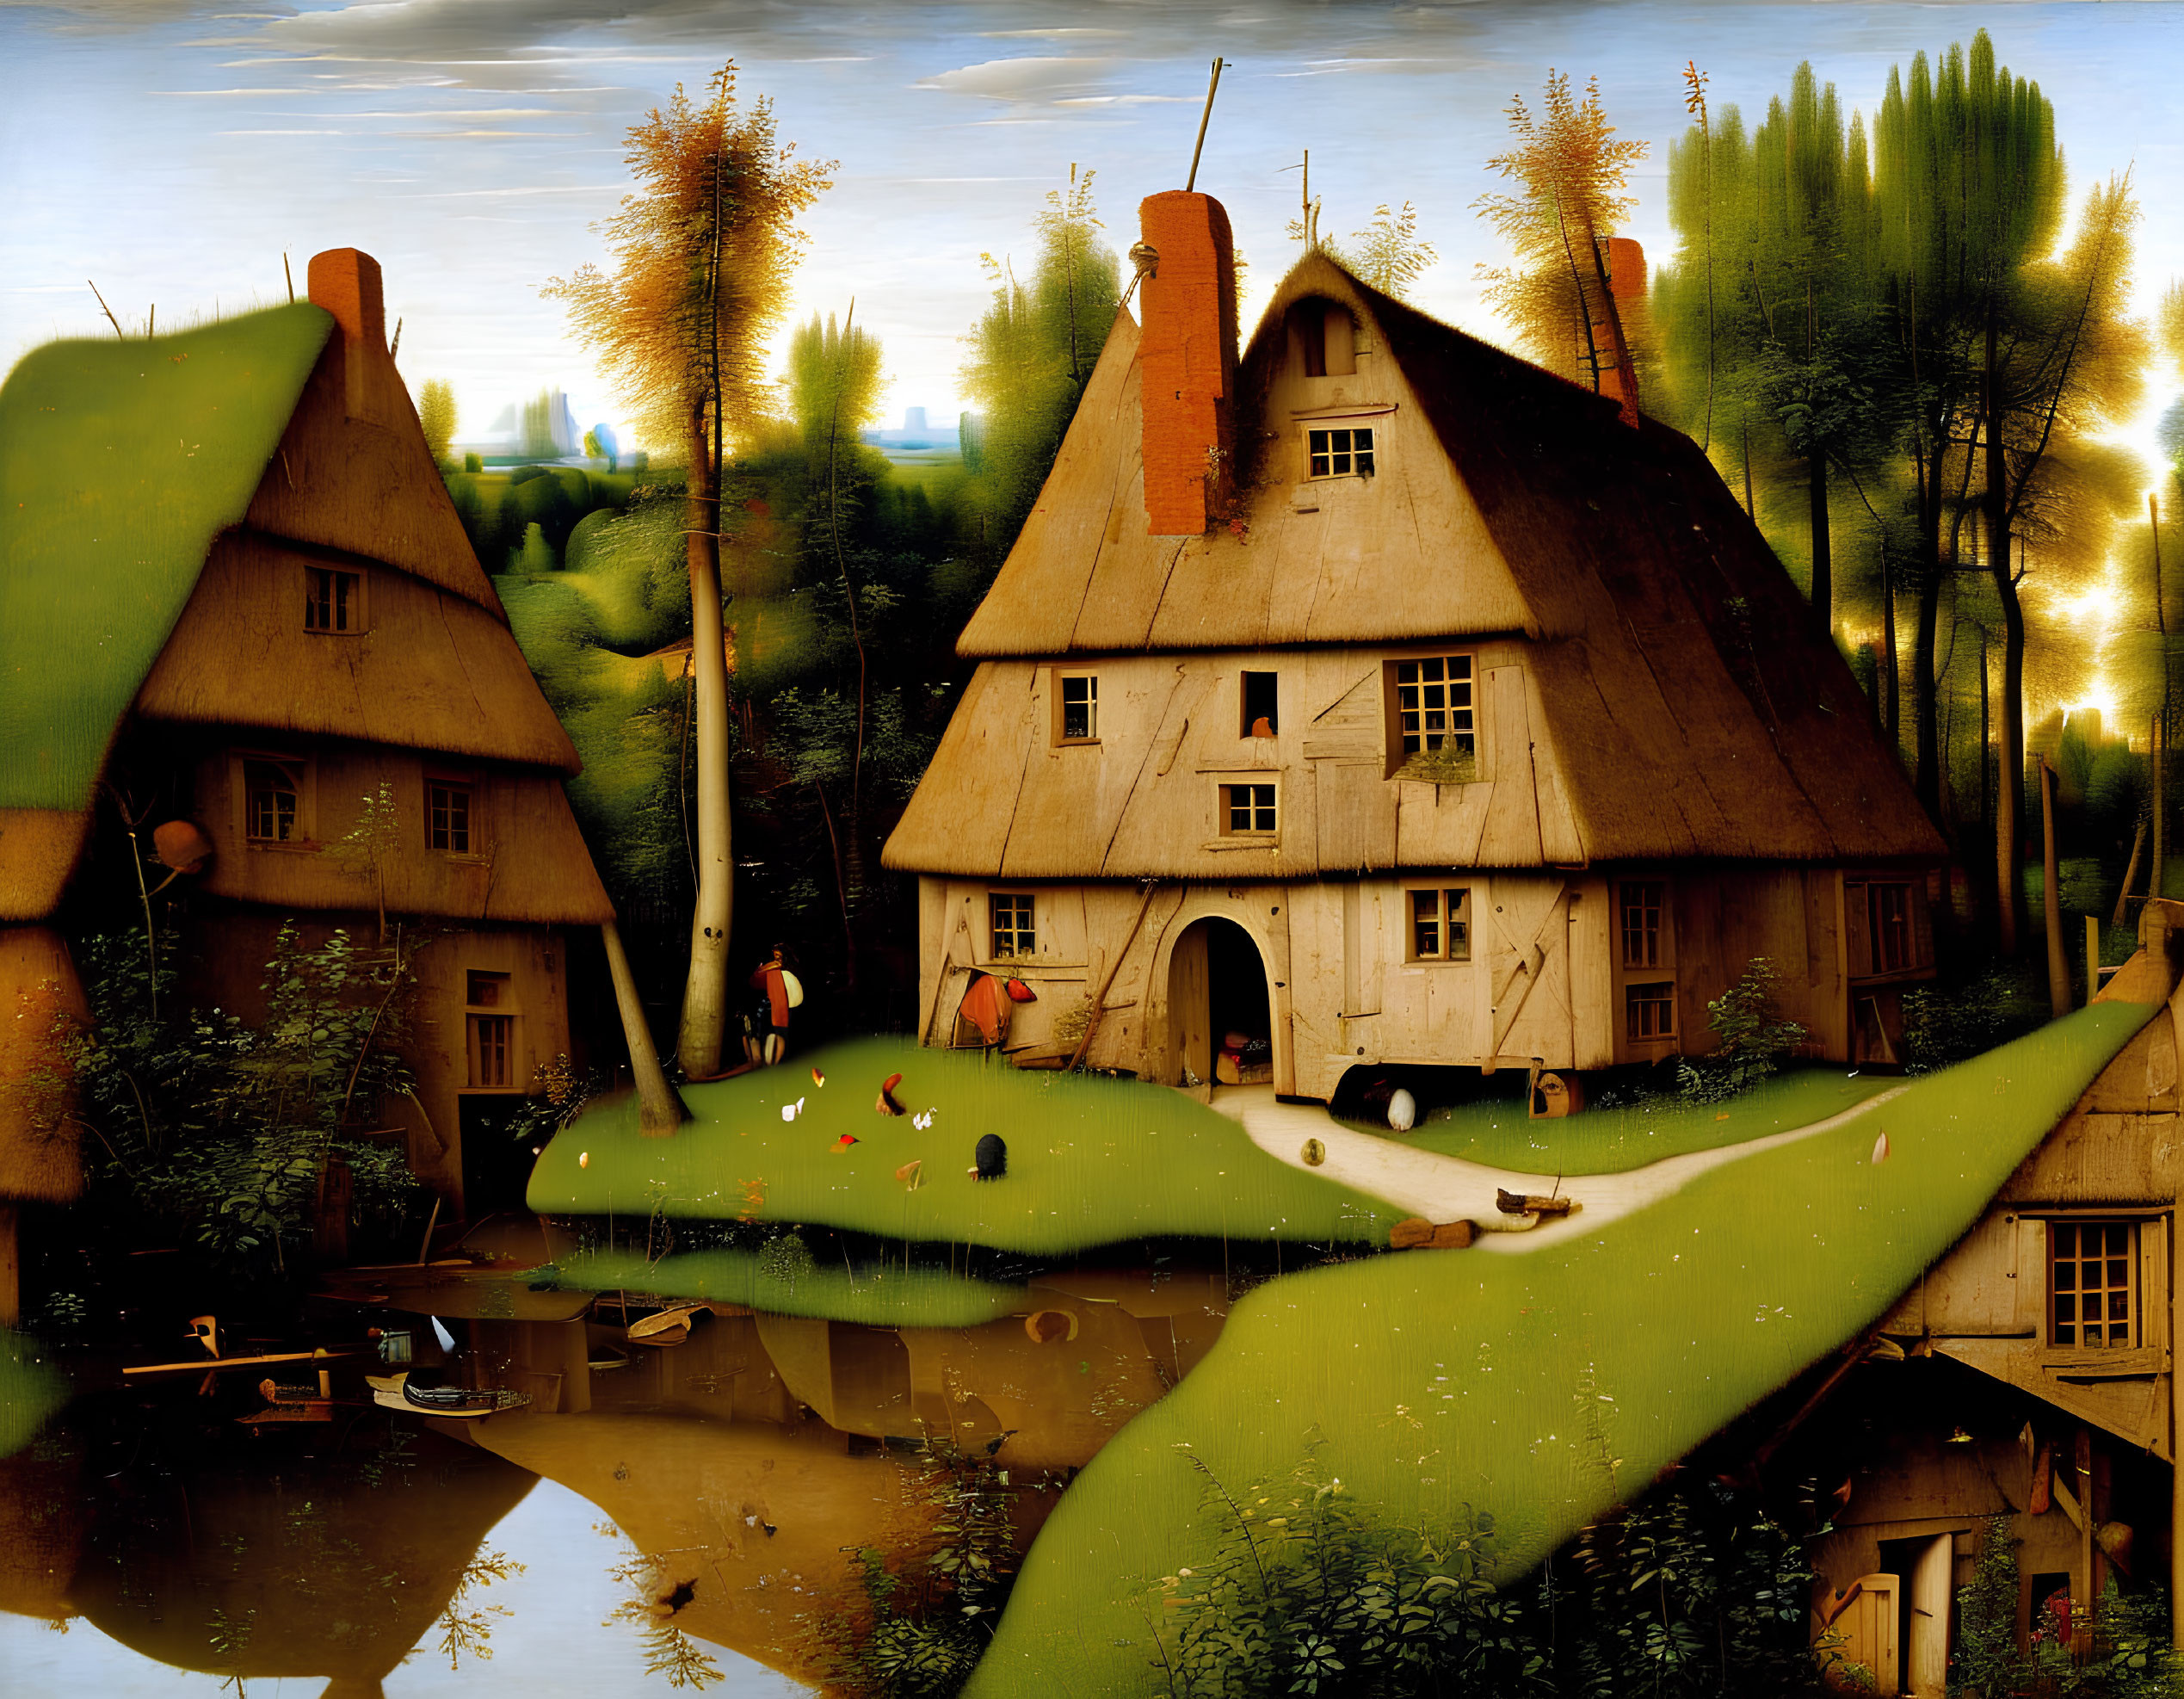 Whimsical village painting with oversized cottages & serene landscape